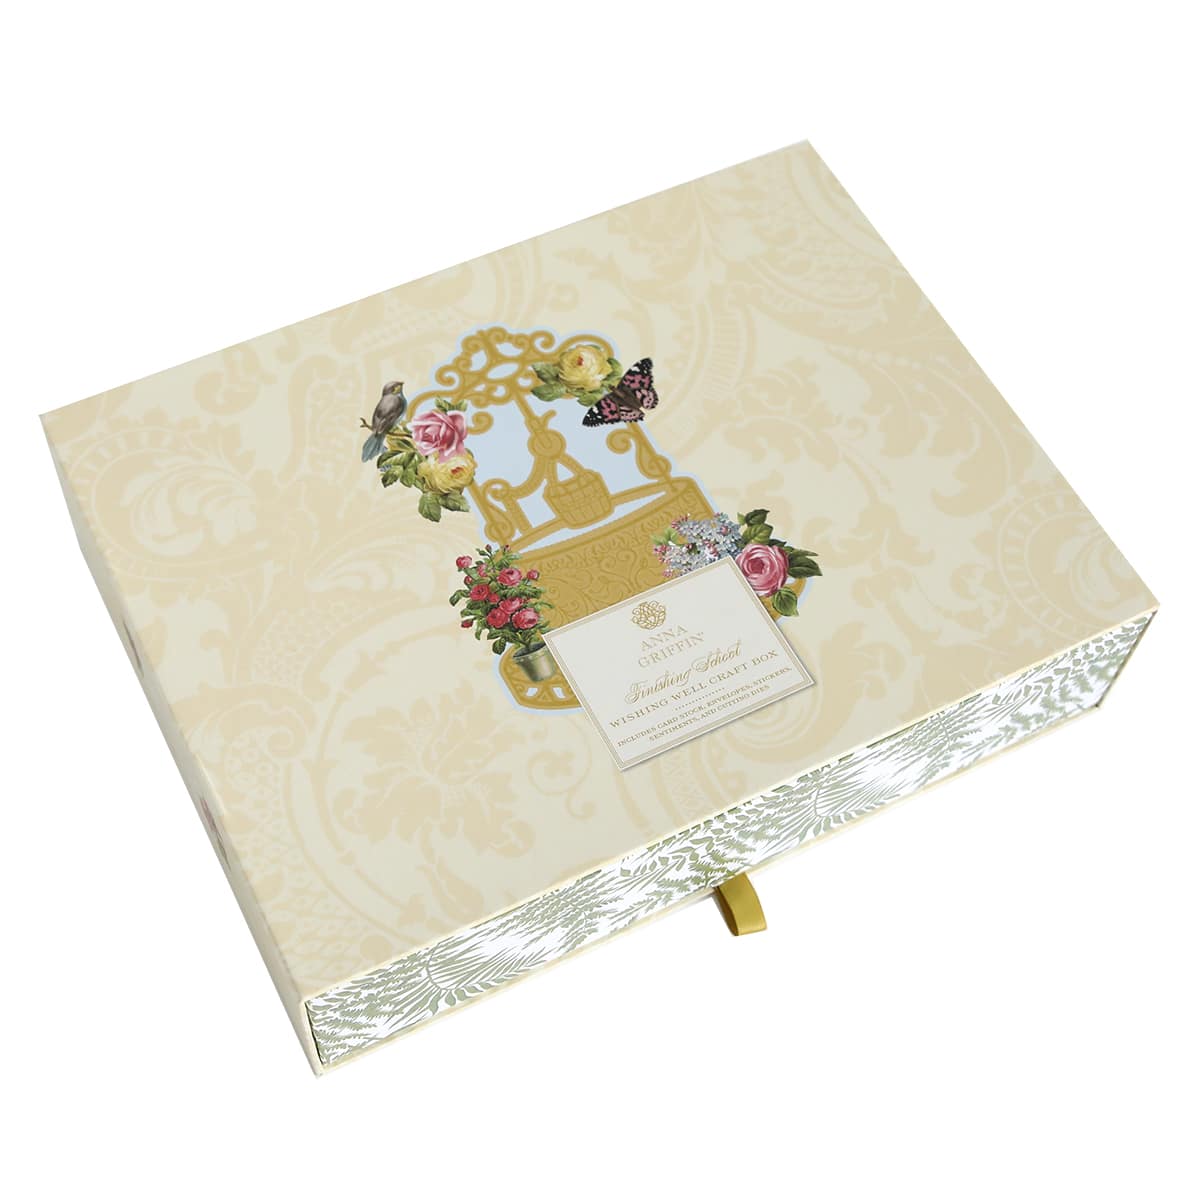 A Wishing Well Easel Finishing School Kit with a floral design on it.